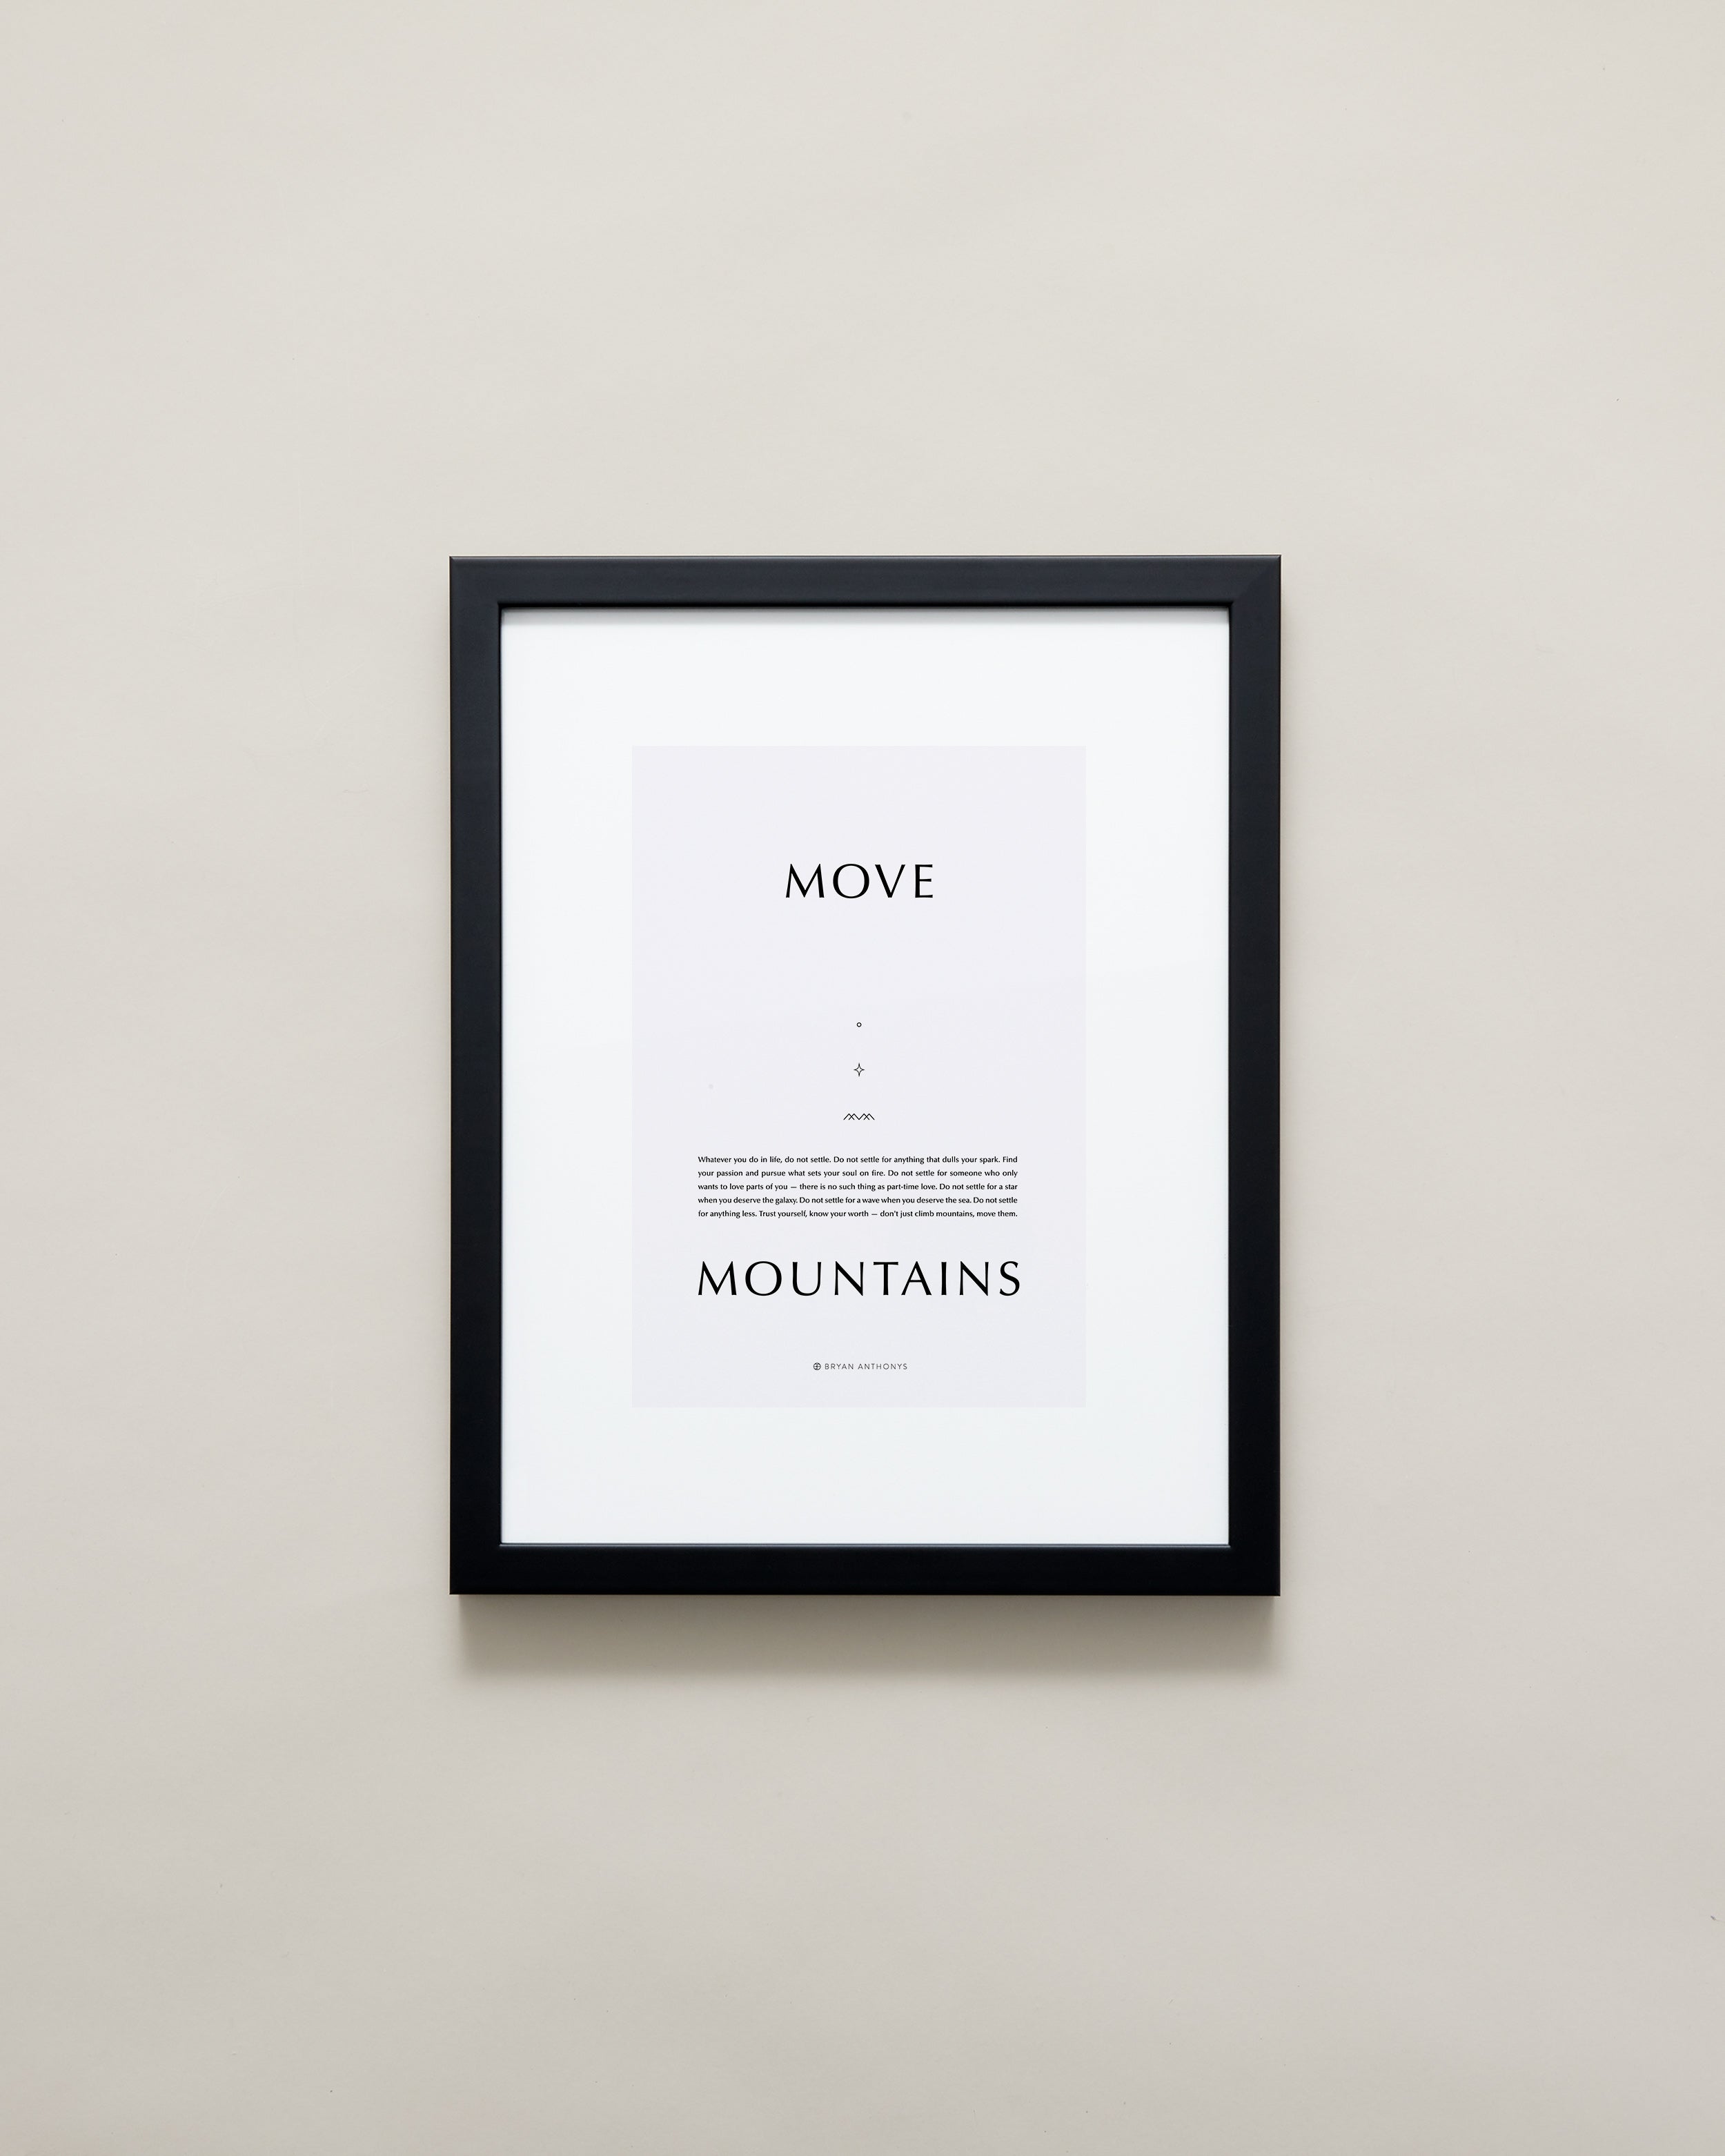 Bryan Anthonys Home Decor Purposeful Prints Move Mountains Iconic Framed Print Gray Art With Black Frame 11x14